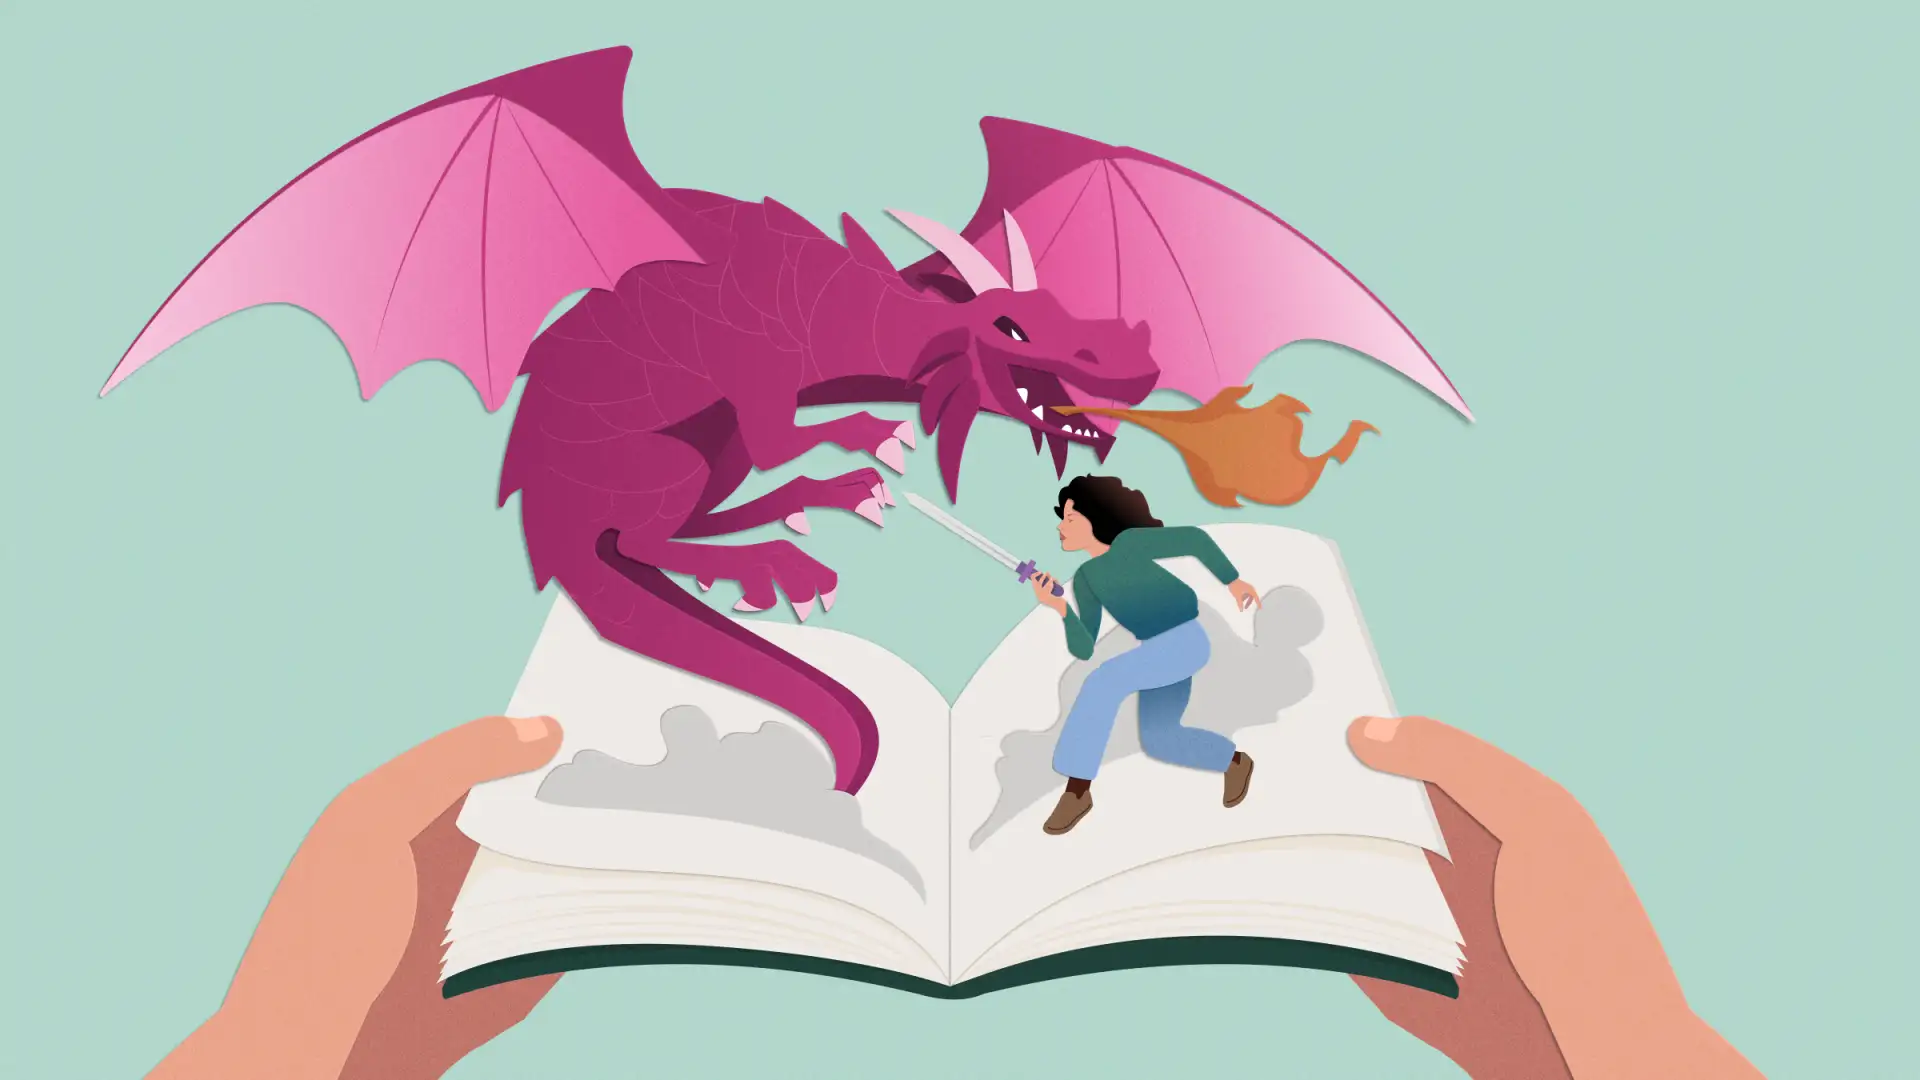 Person with a sword and fire-breathing dragon face each other atop open book held in two hands.